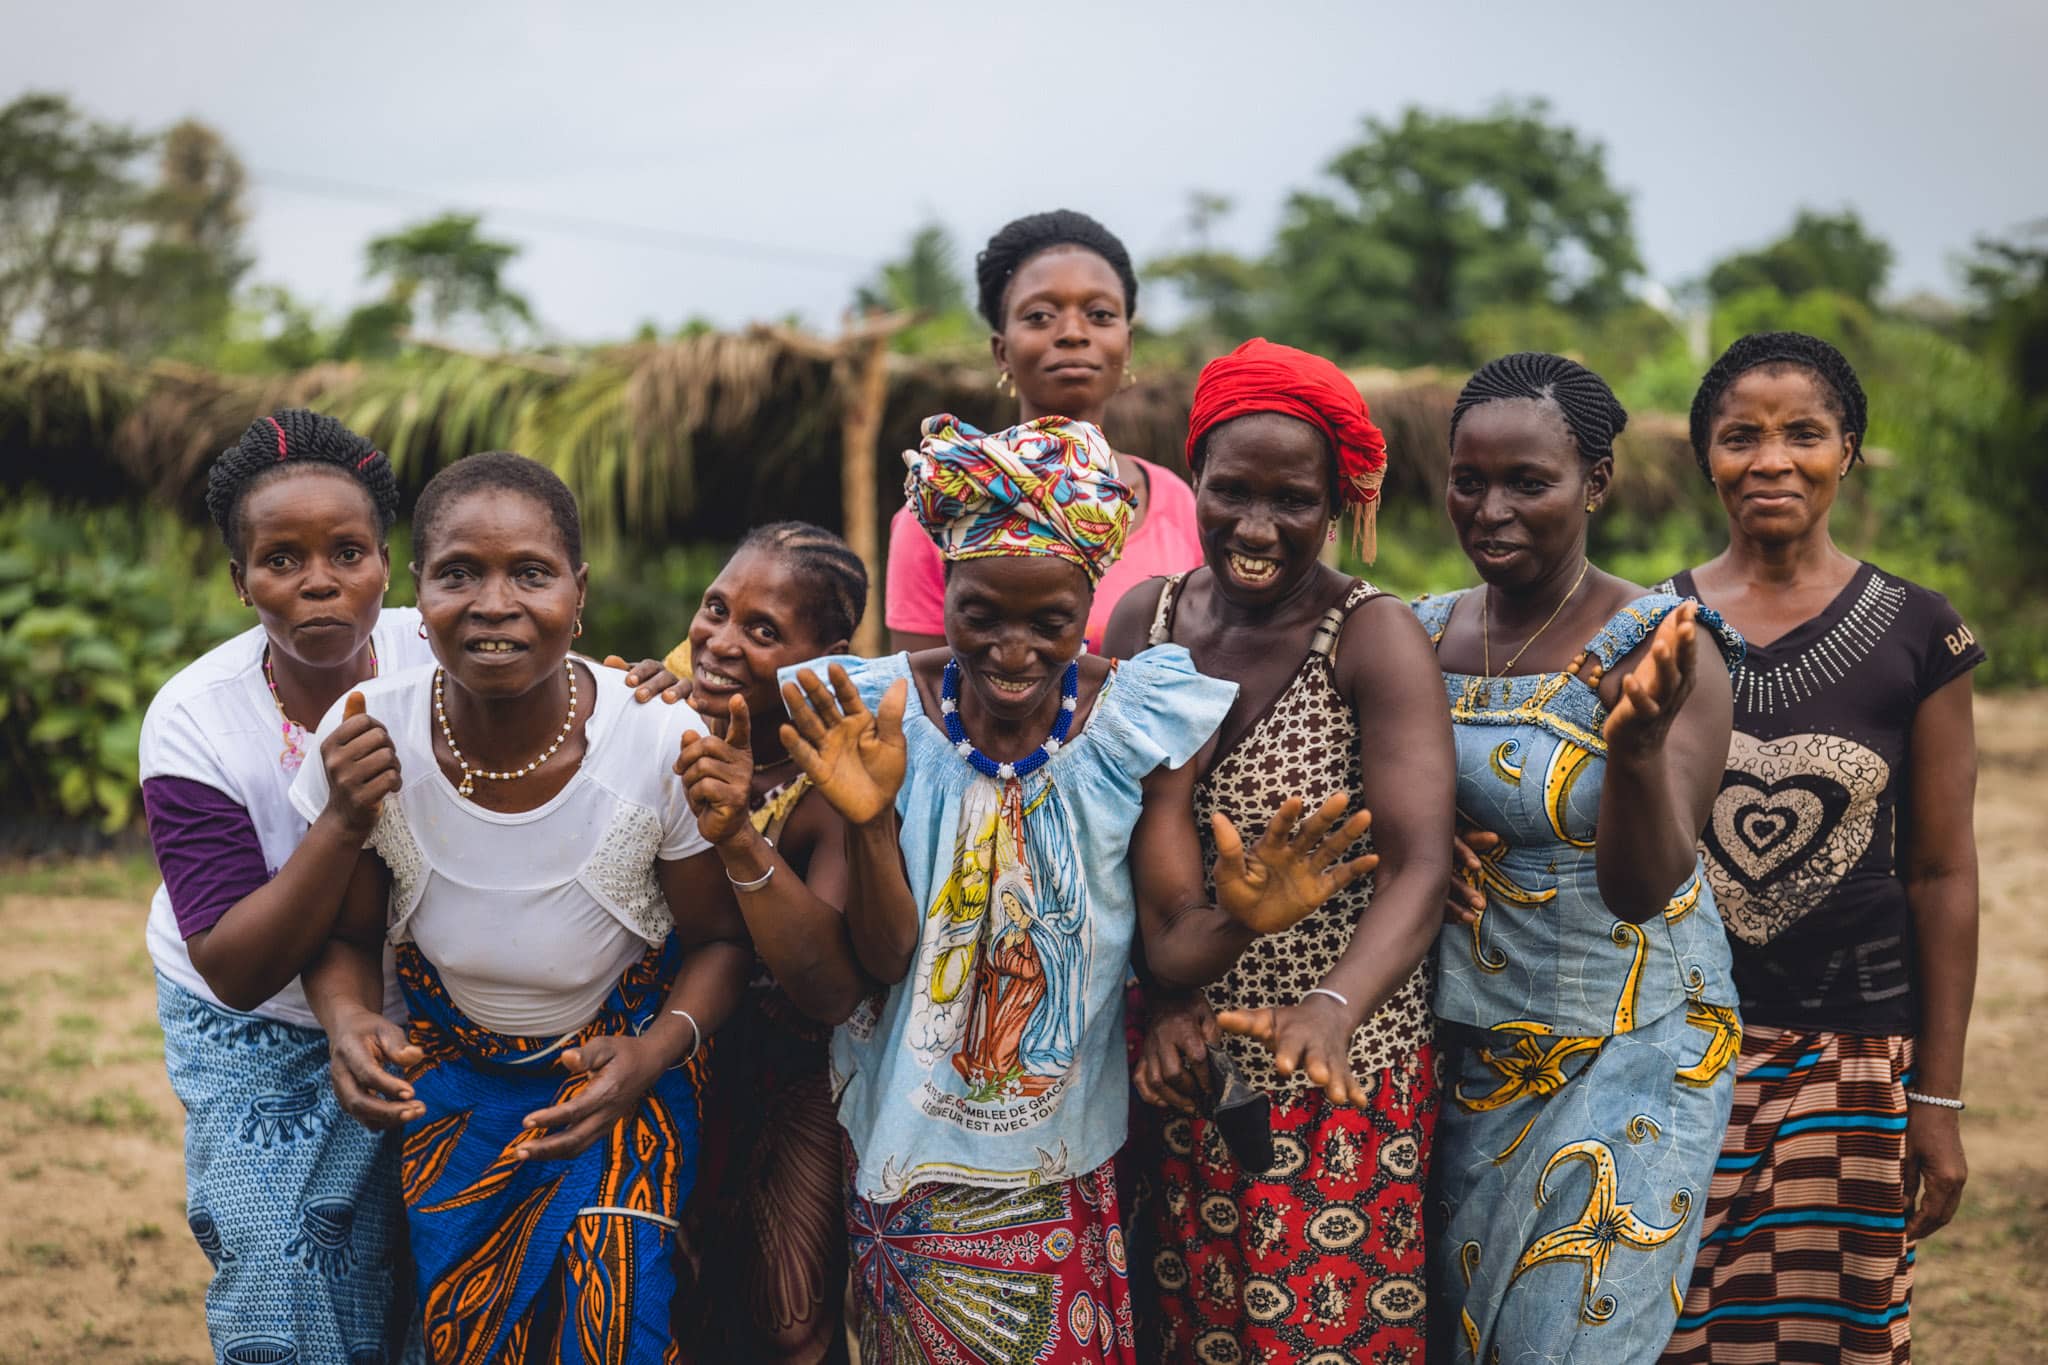 group of women from a cocoa producing community in cote d’ivoire